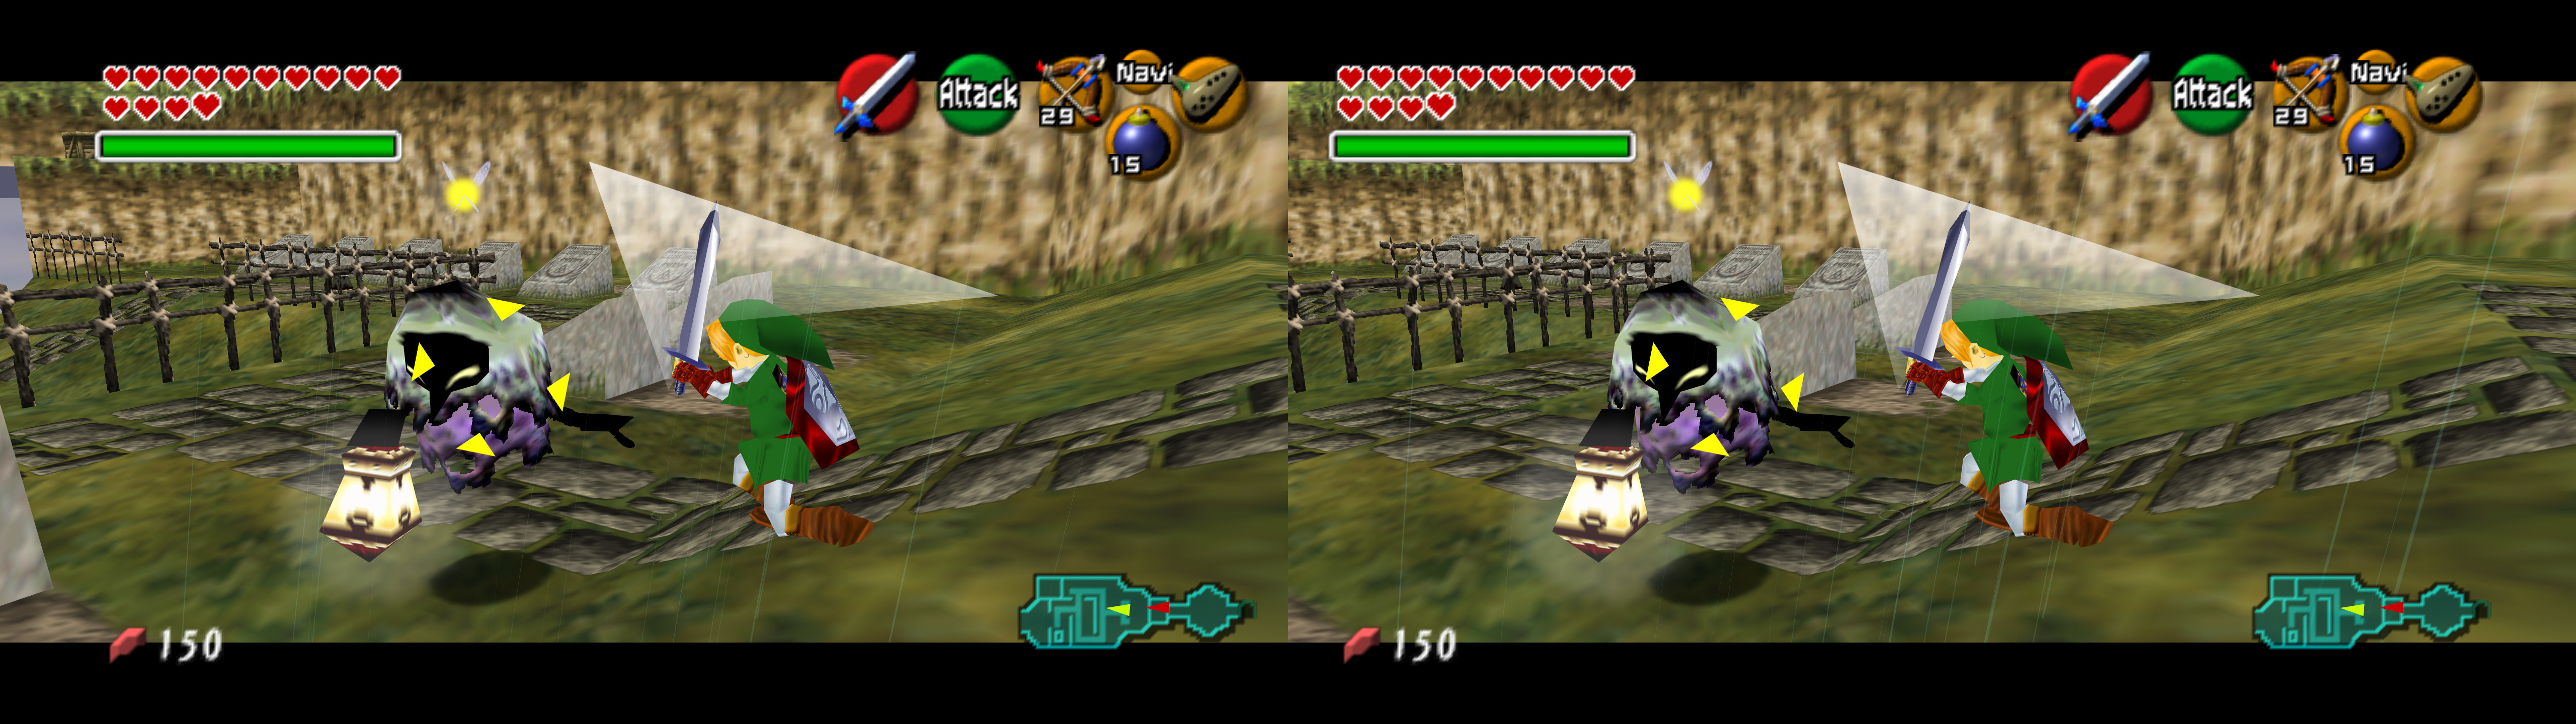 The Legend Of Zelda: Ocarina Of Time' PC port now supports 60FPS